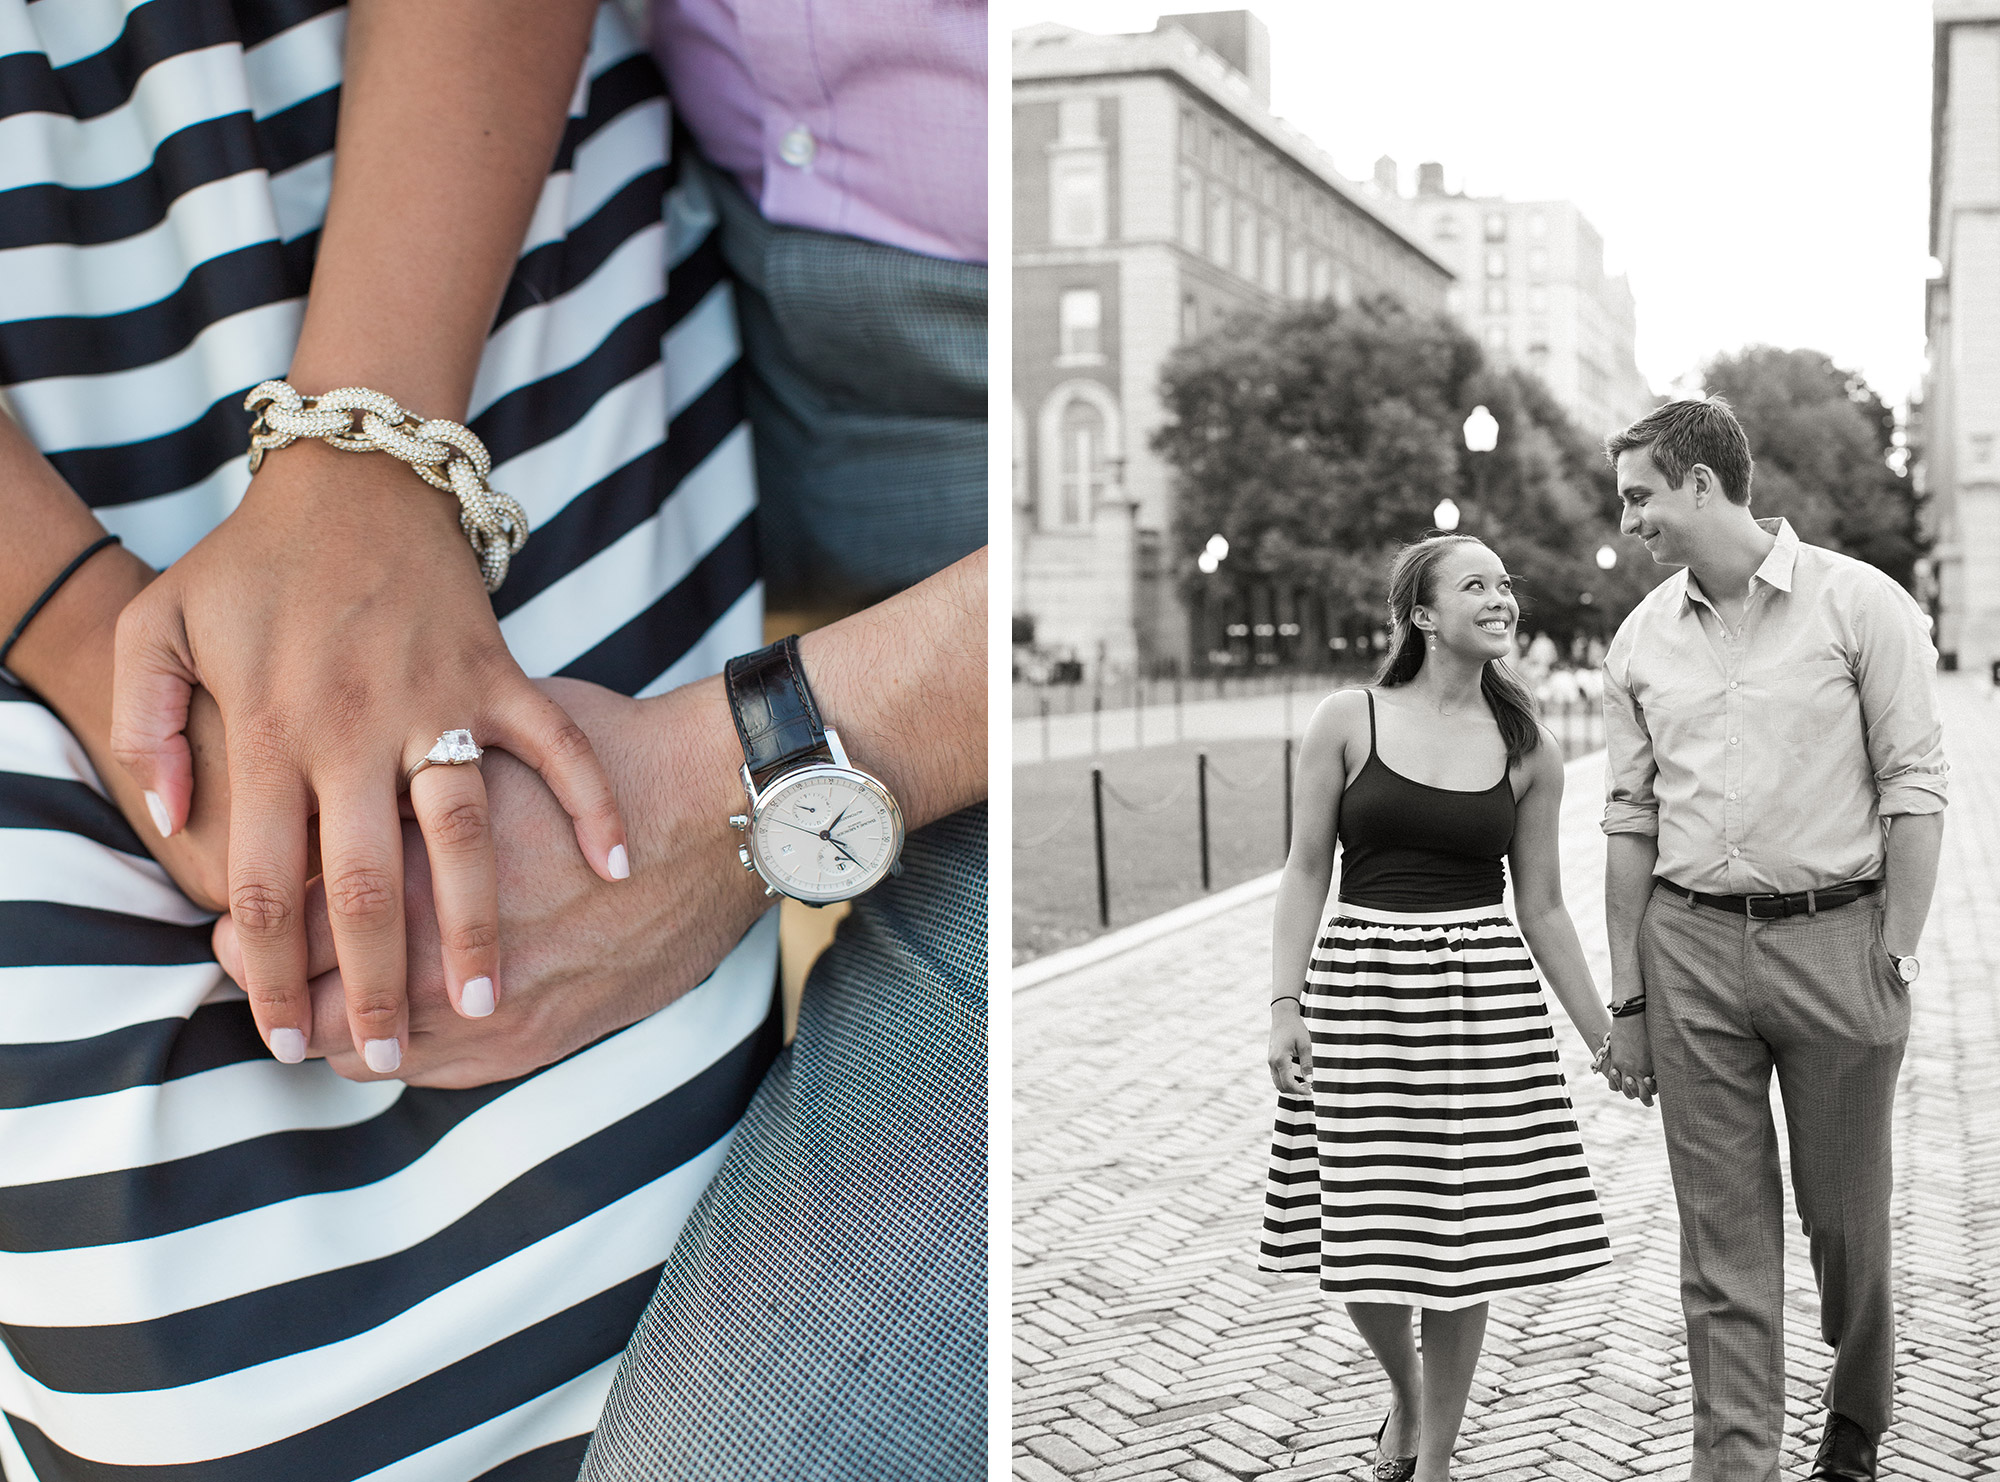 Engagement session in Manhattan at the Met Museum and Columbia University.  Photos by Kelly Kollar Photography.